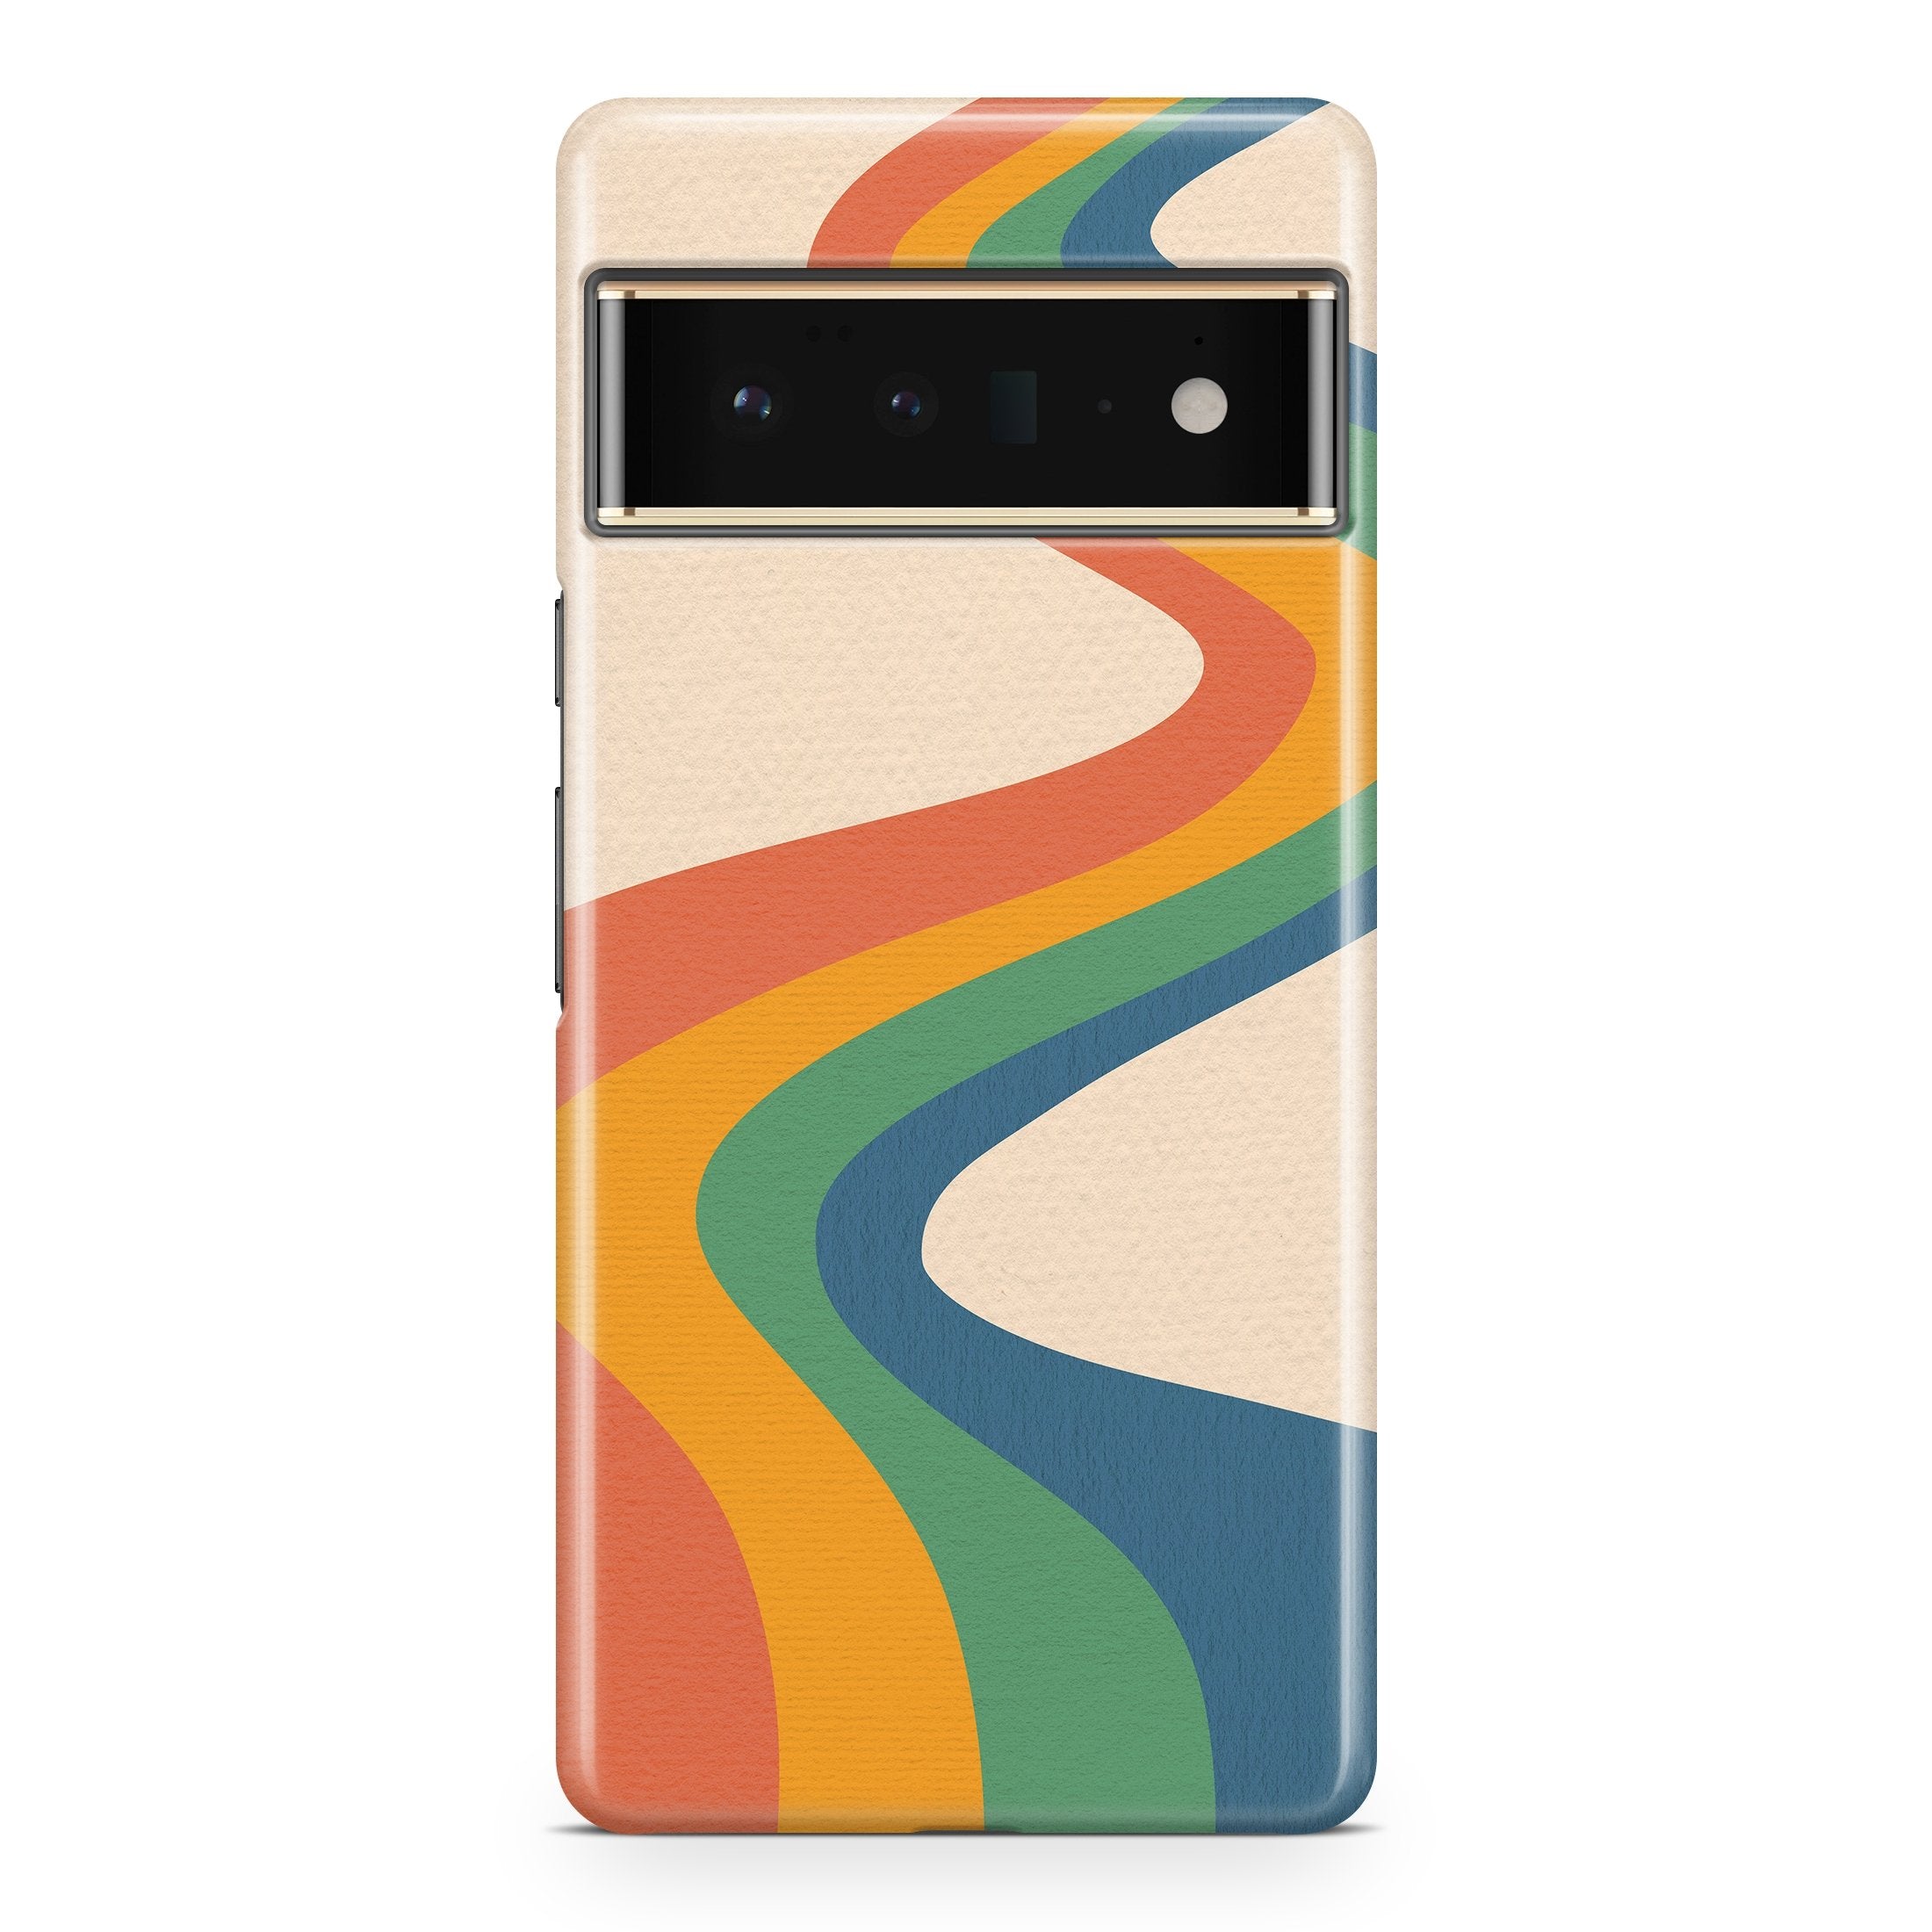 Slide into the Past - Google phone case designs by CaseSwagger